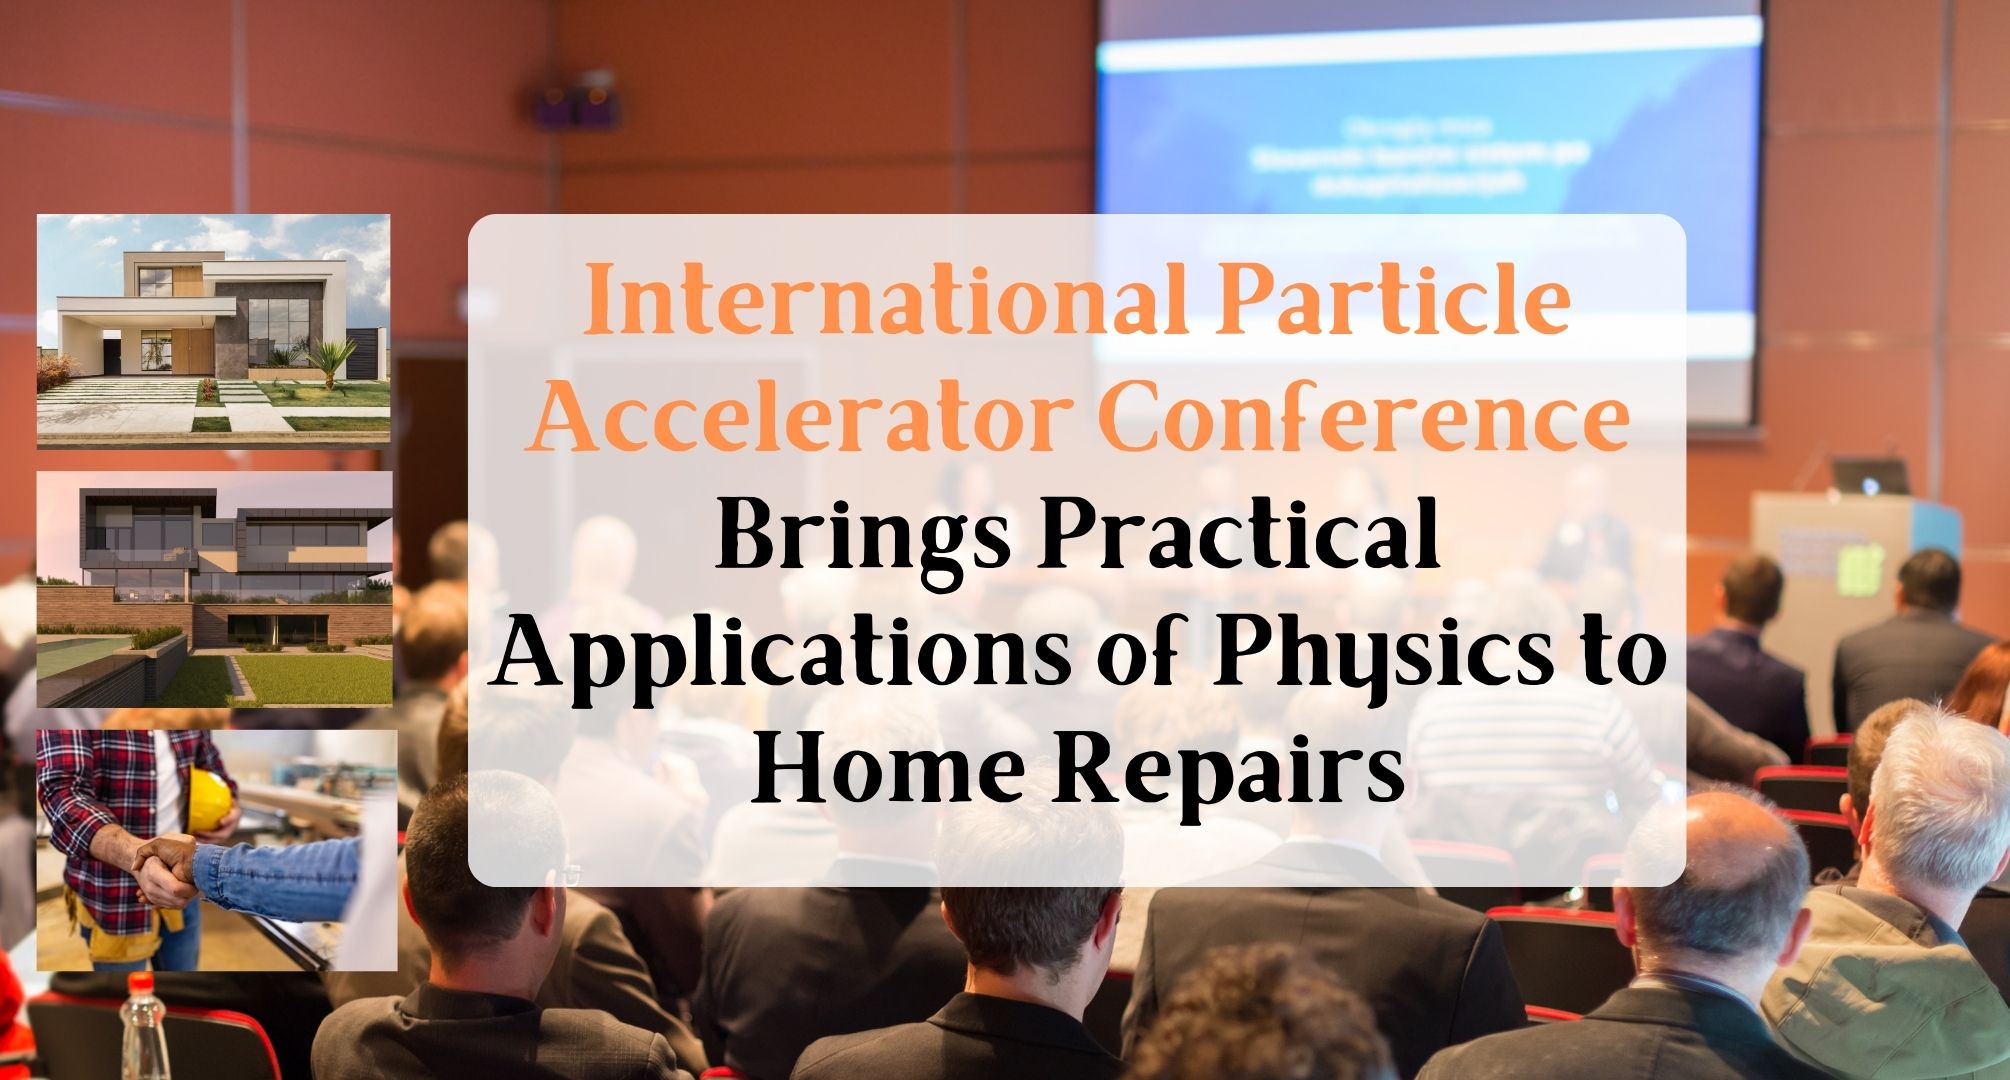 International Particle Accelerator Conference Brings Practical Applications of Physics to Home Repairs